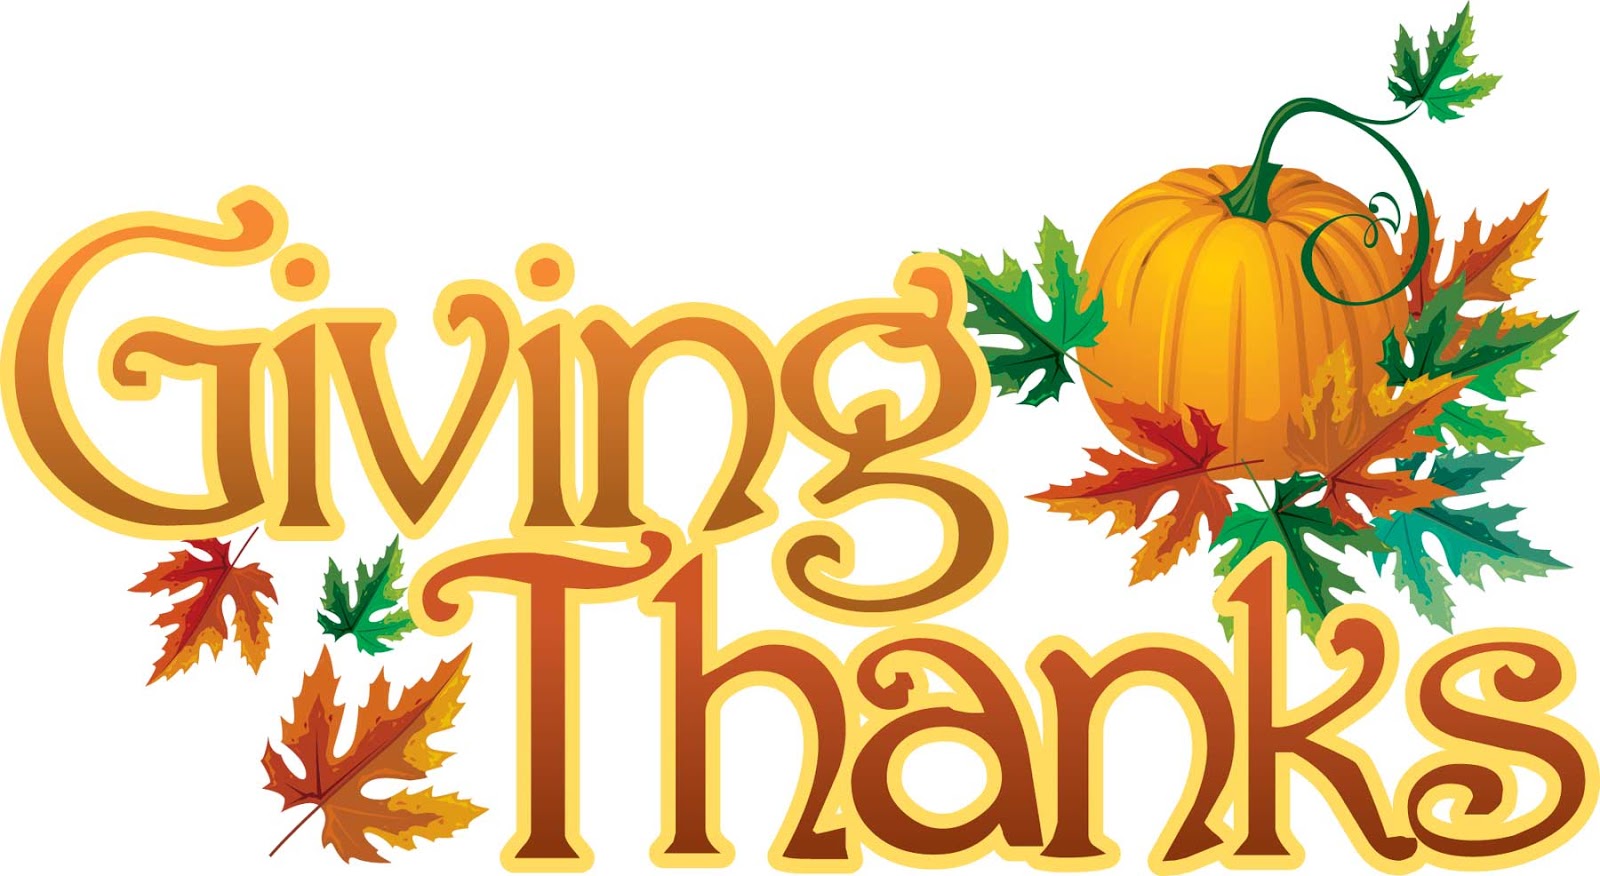 Free thanksgiving blessings cliparts. Pray clipart thankful